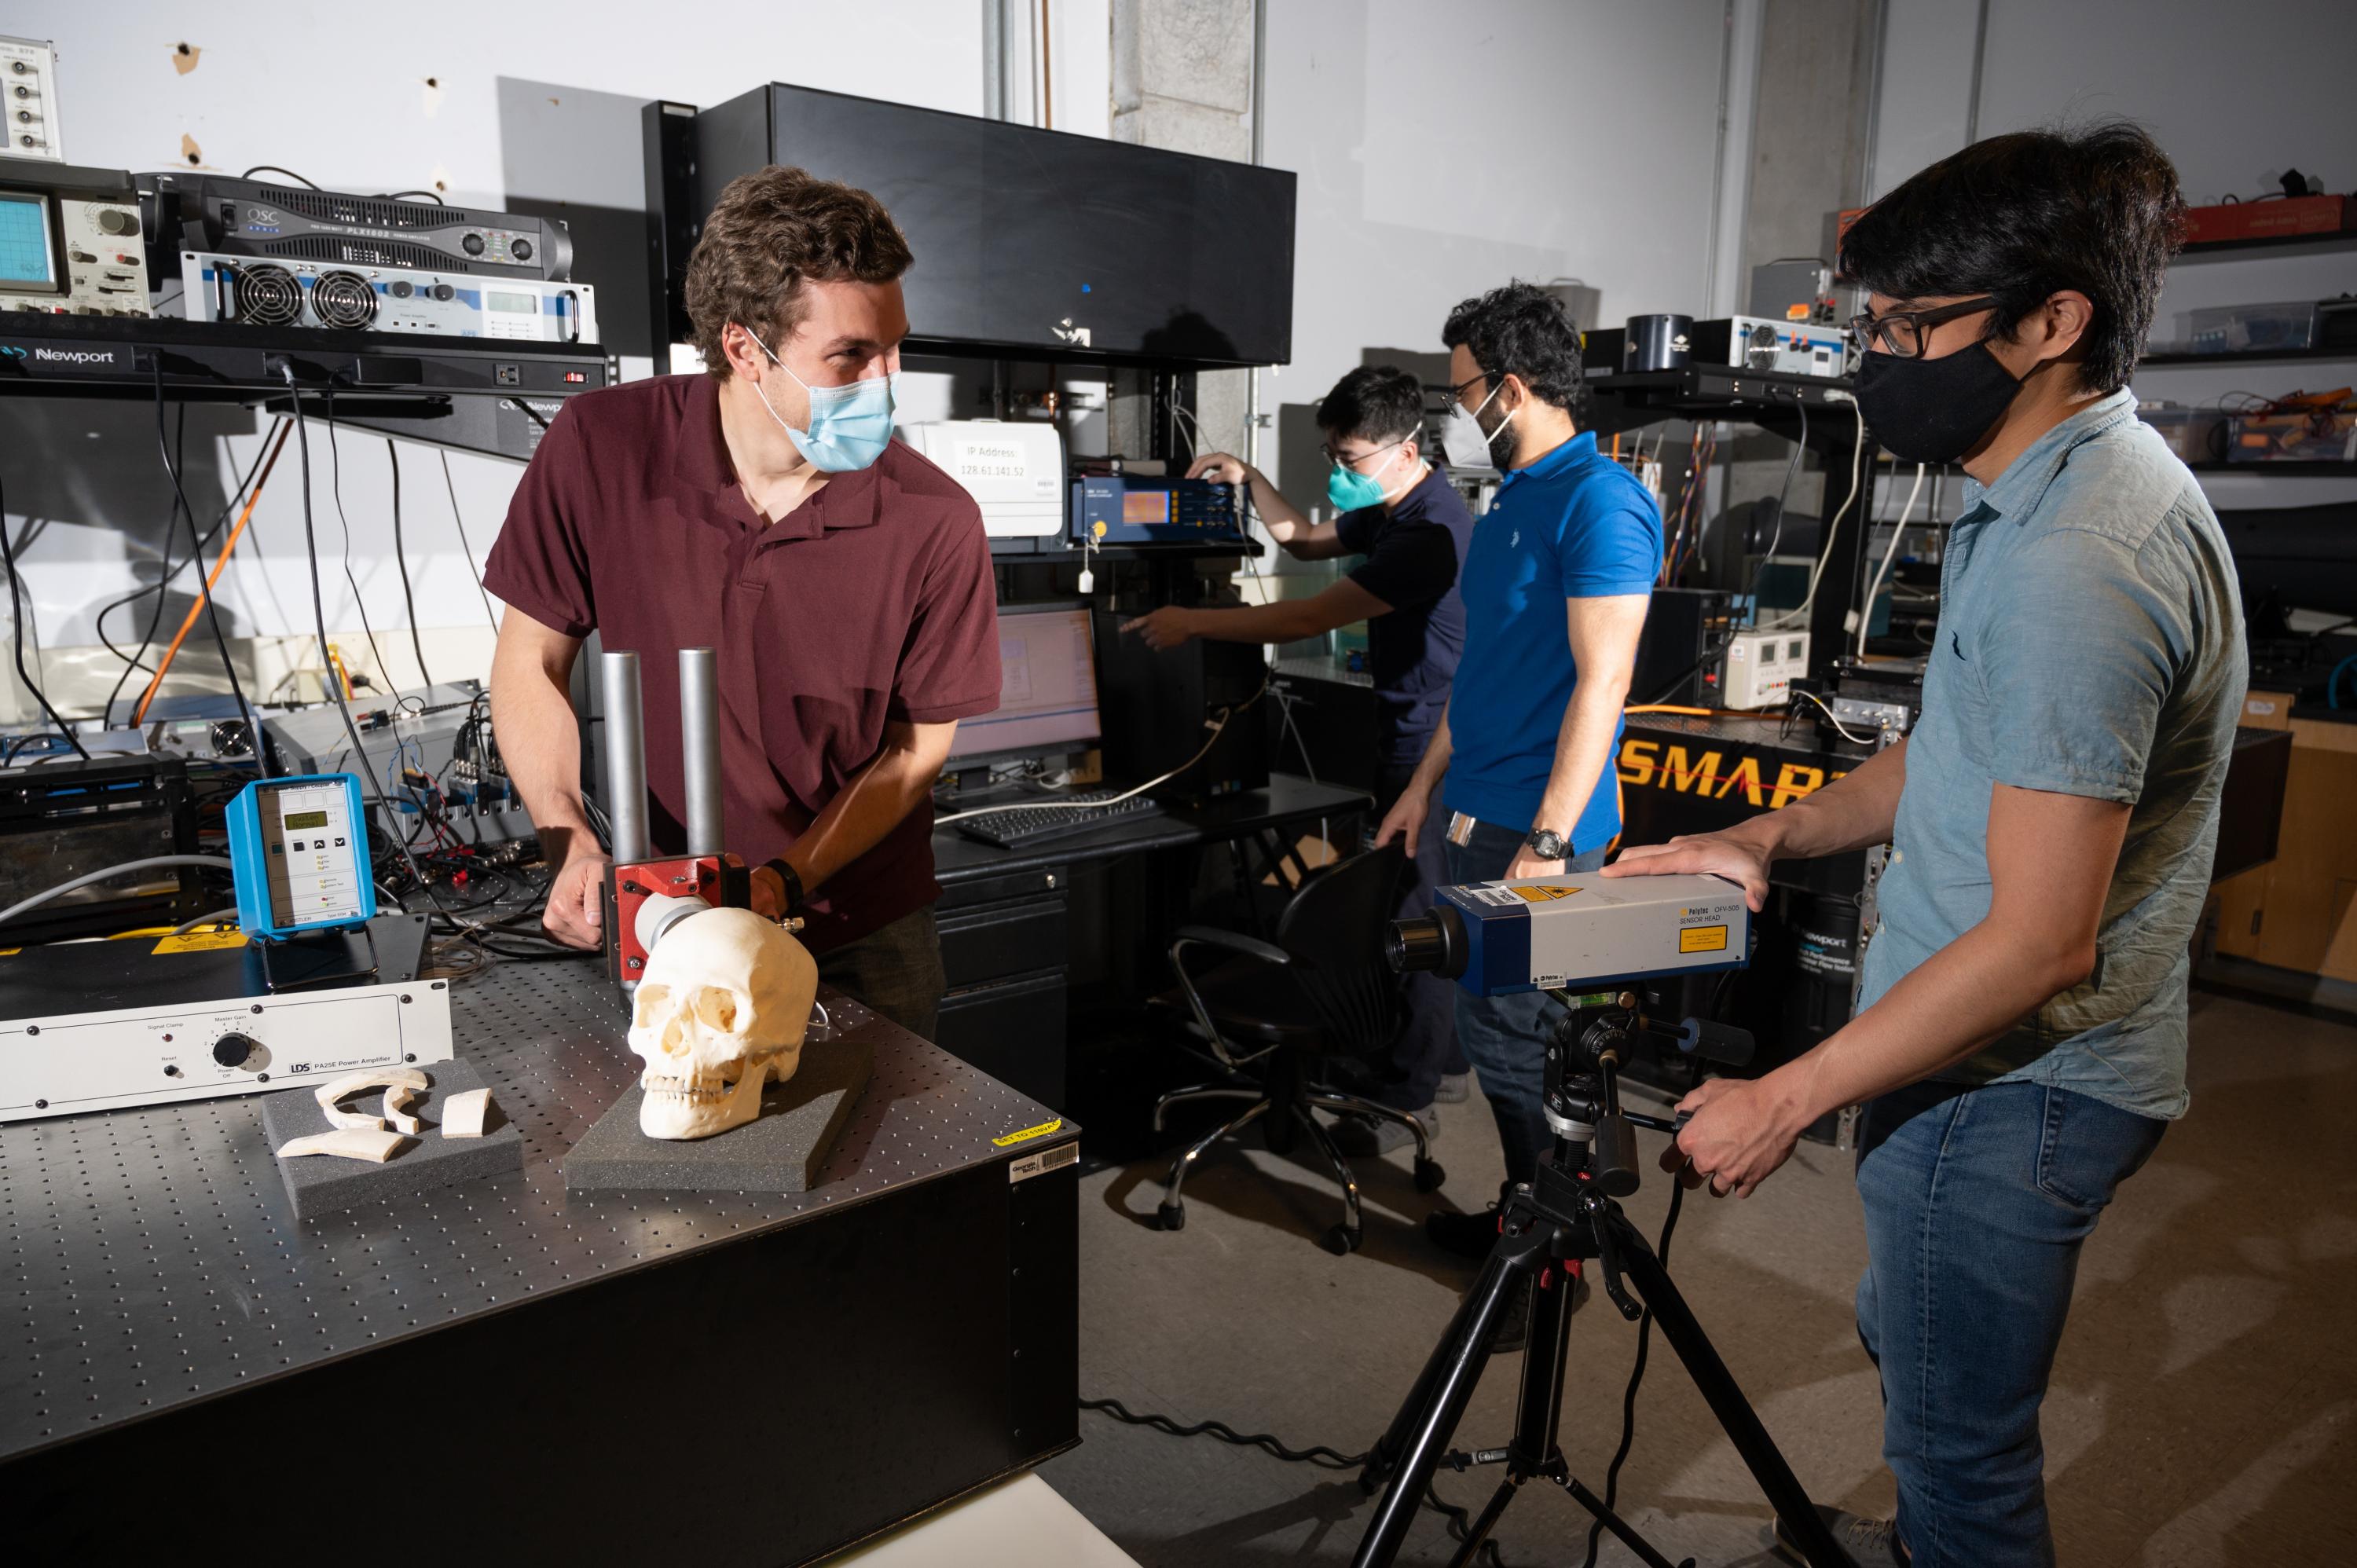 Graduate research assistants Eetu Kohtanen and Pradosh Dash and postdoctoral researchers Christopher Sugino and Bowen Jing test a human skull to measure and characterize its vibration response. (Photo credit: Allison Carter, Georgia Tech)